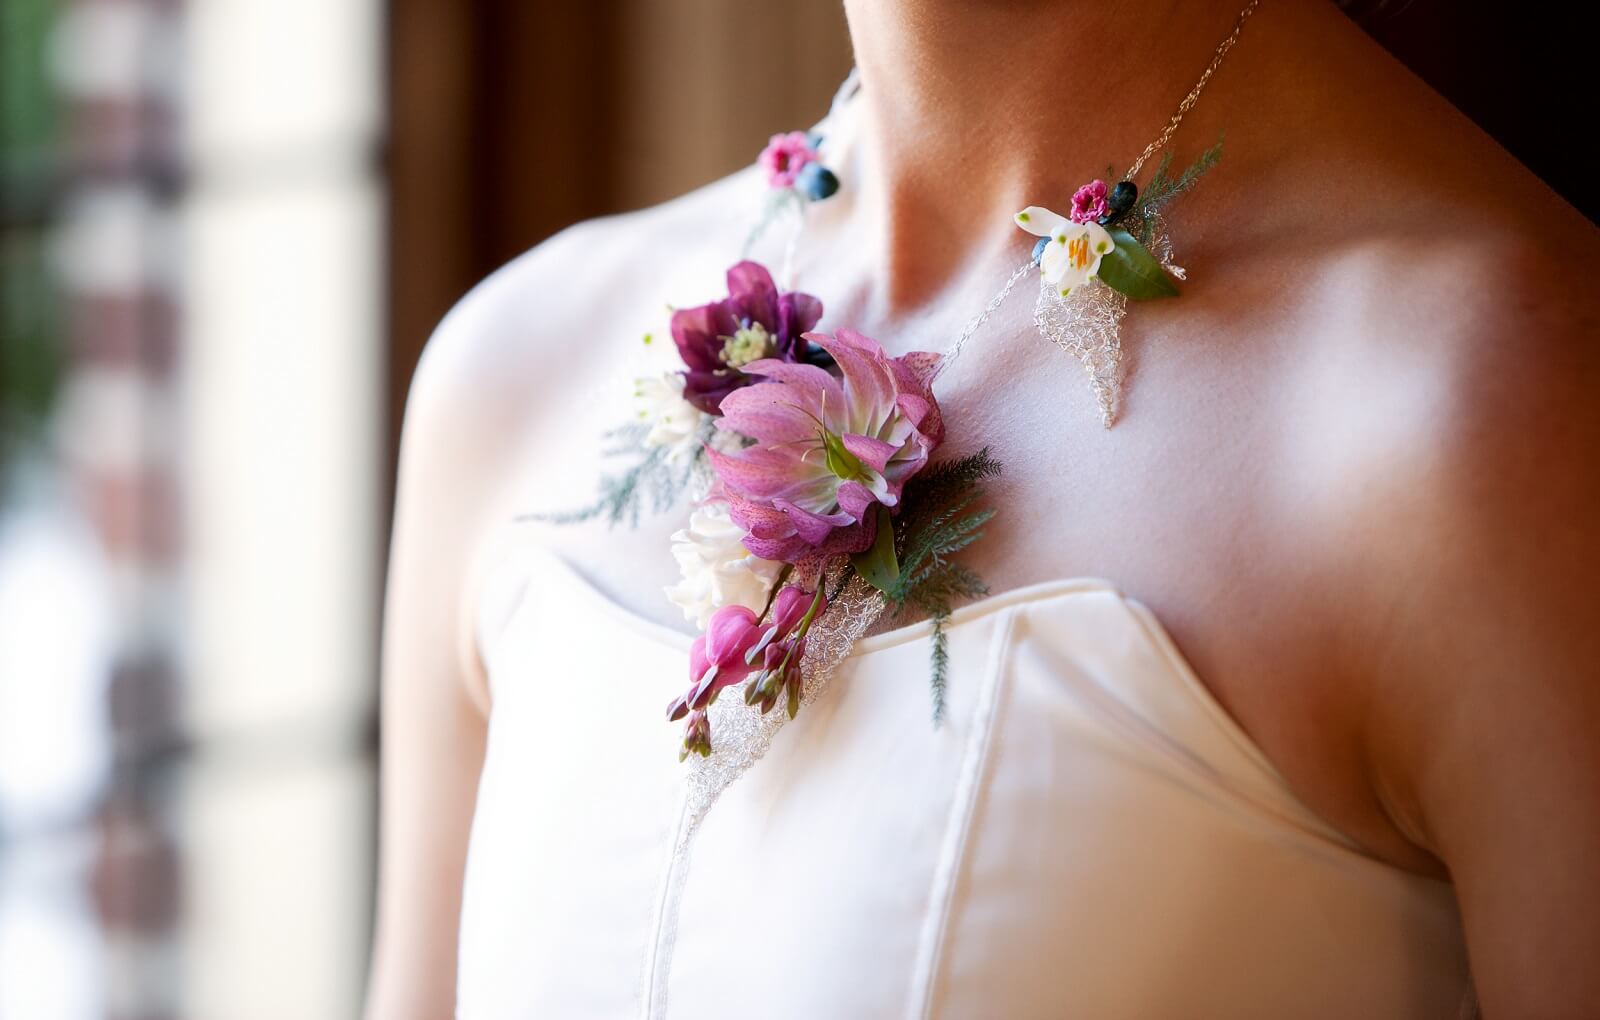 Floral Jewelry Alternatives Brides Can Try On their Weddings: A Bit Different Feel and Style